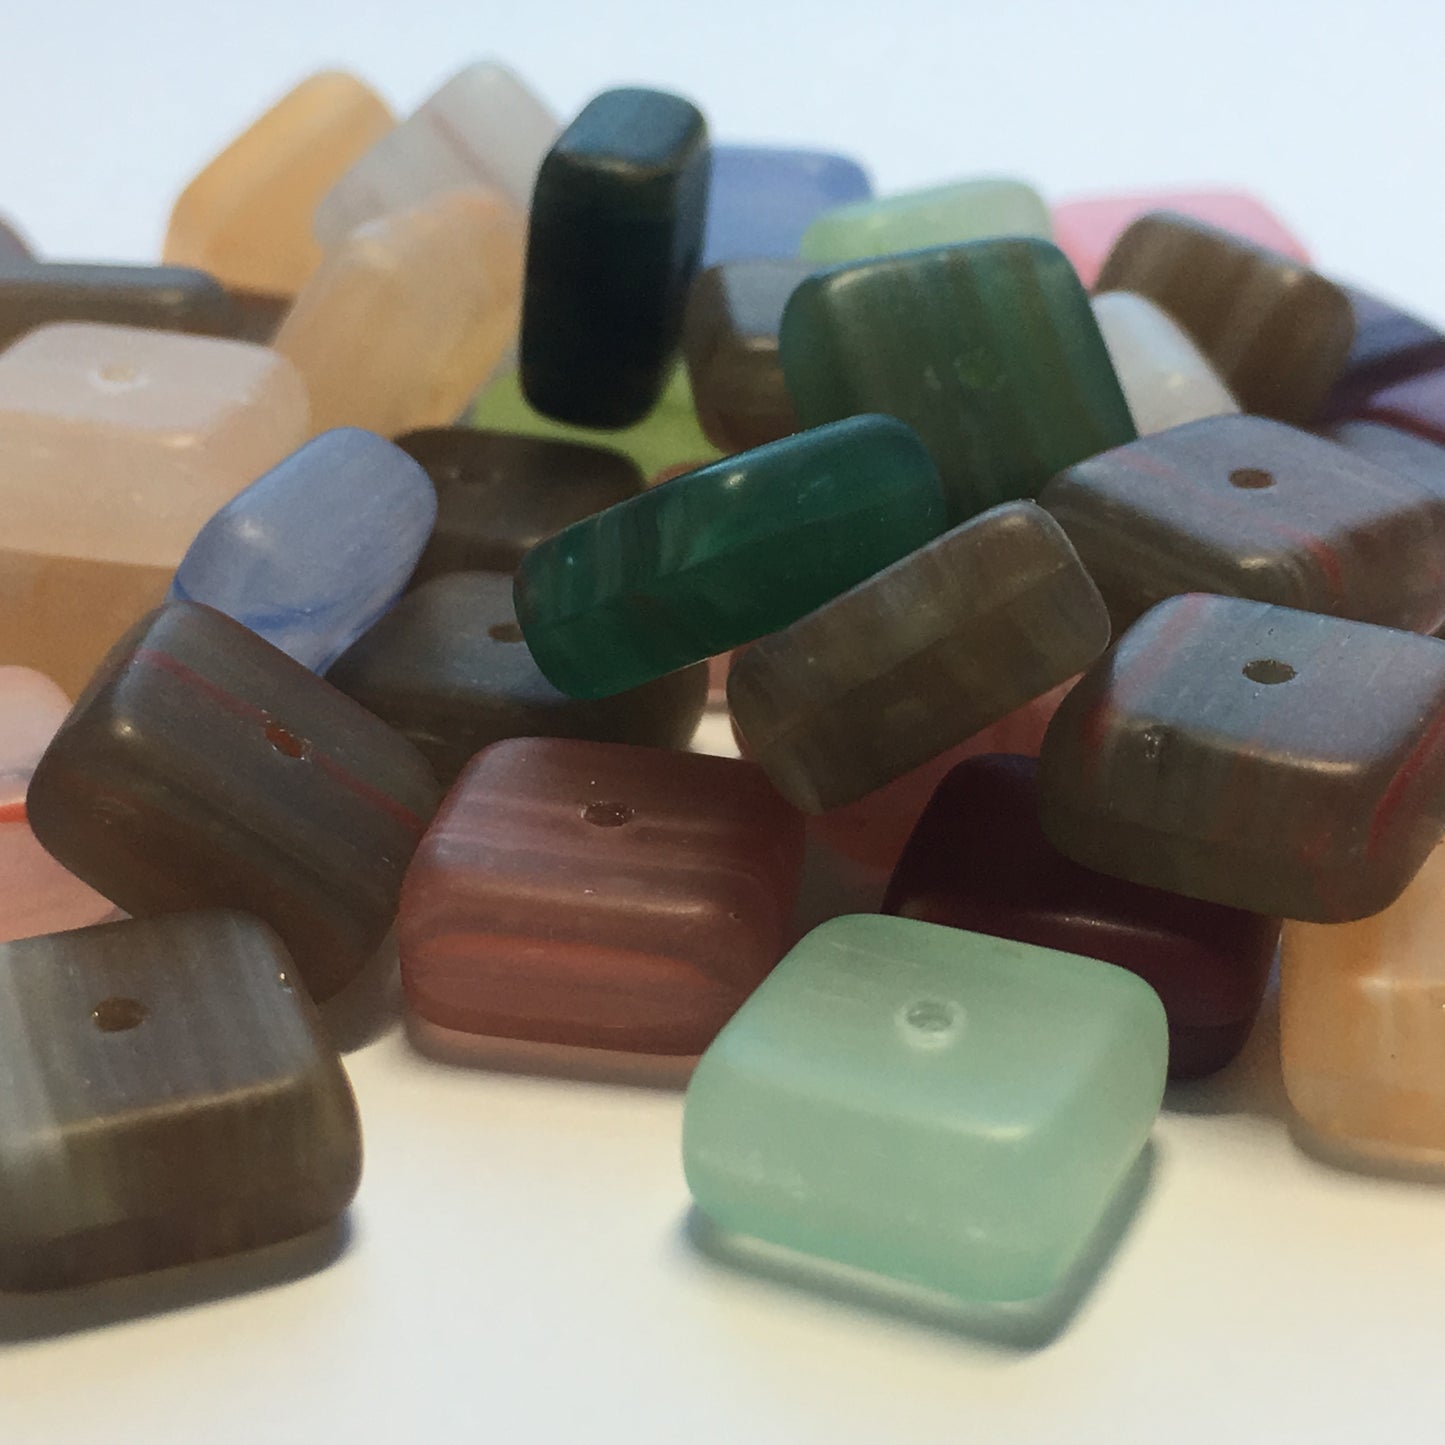 Translucent Frosted Glass Square Flat Beads, Multiple Colors, 10 x 5 mm, 43 Beads